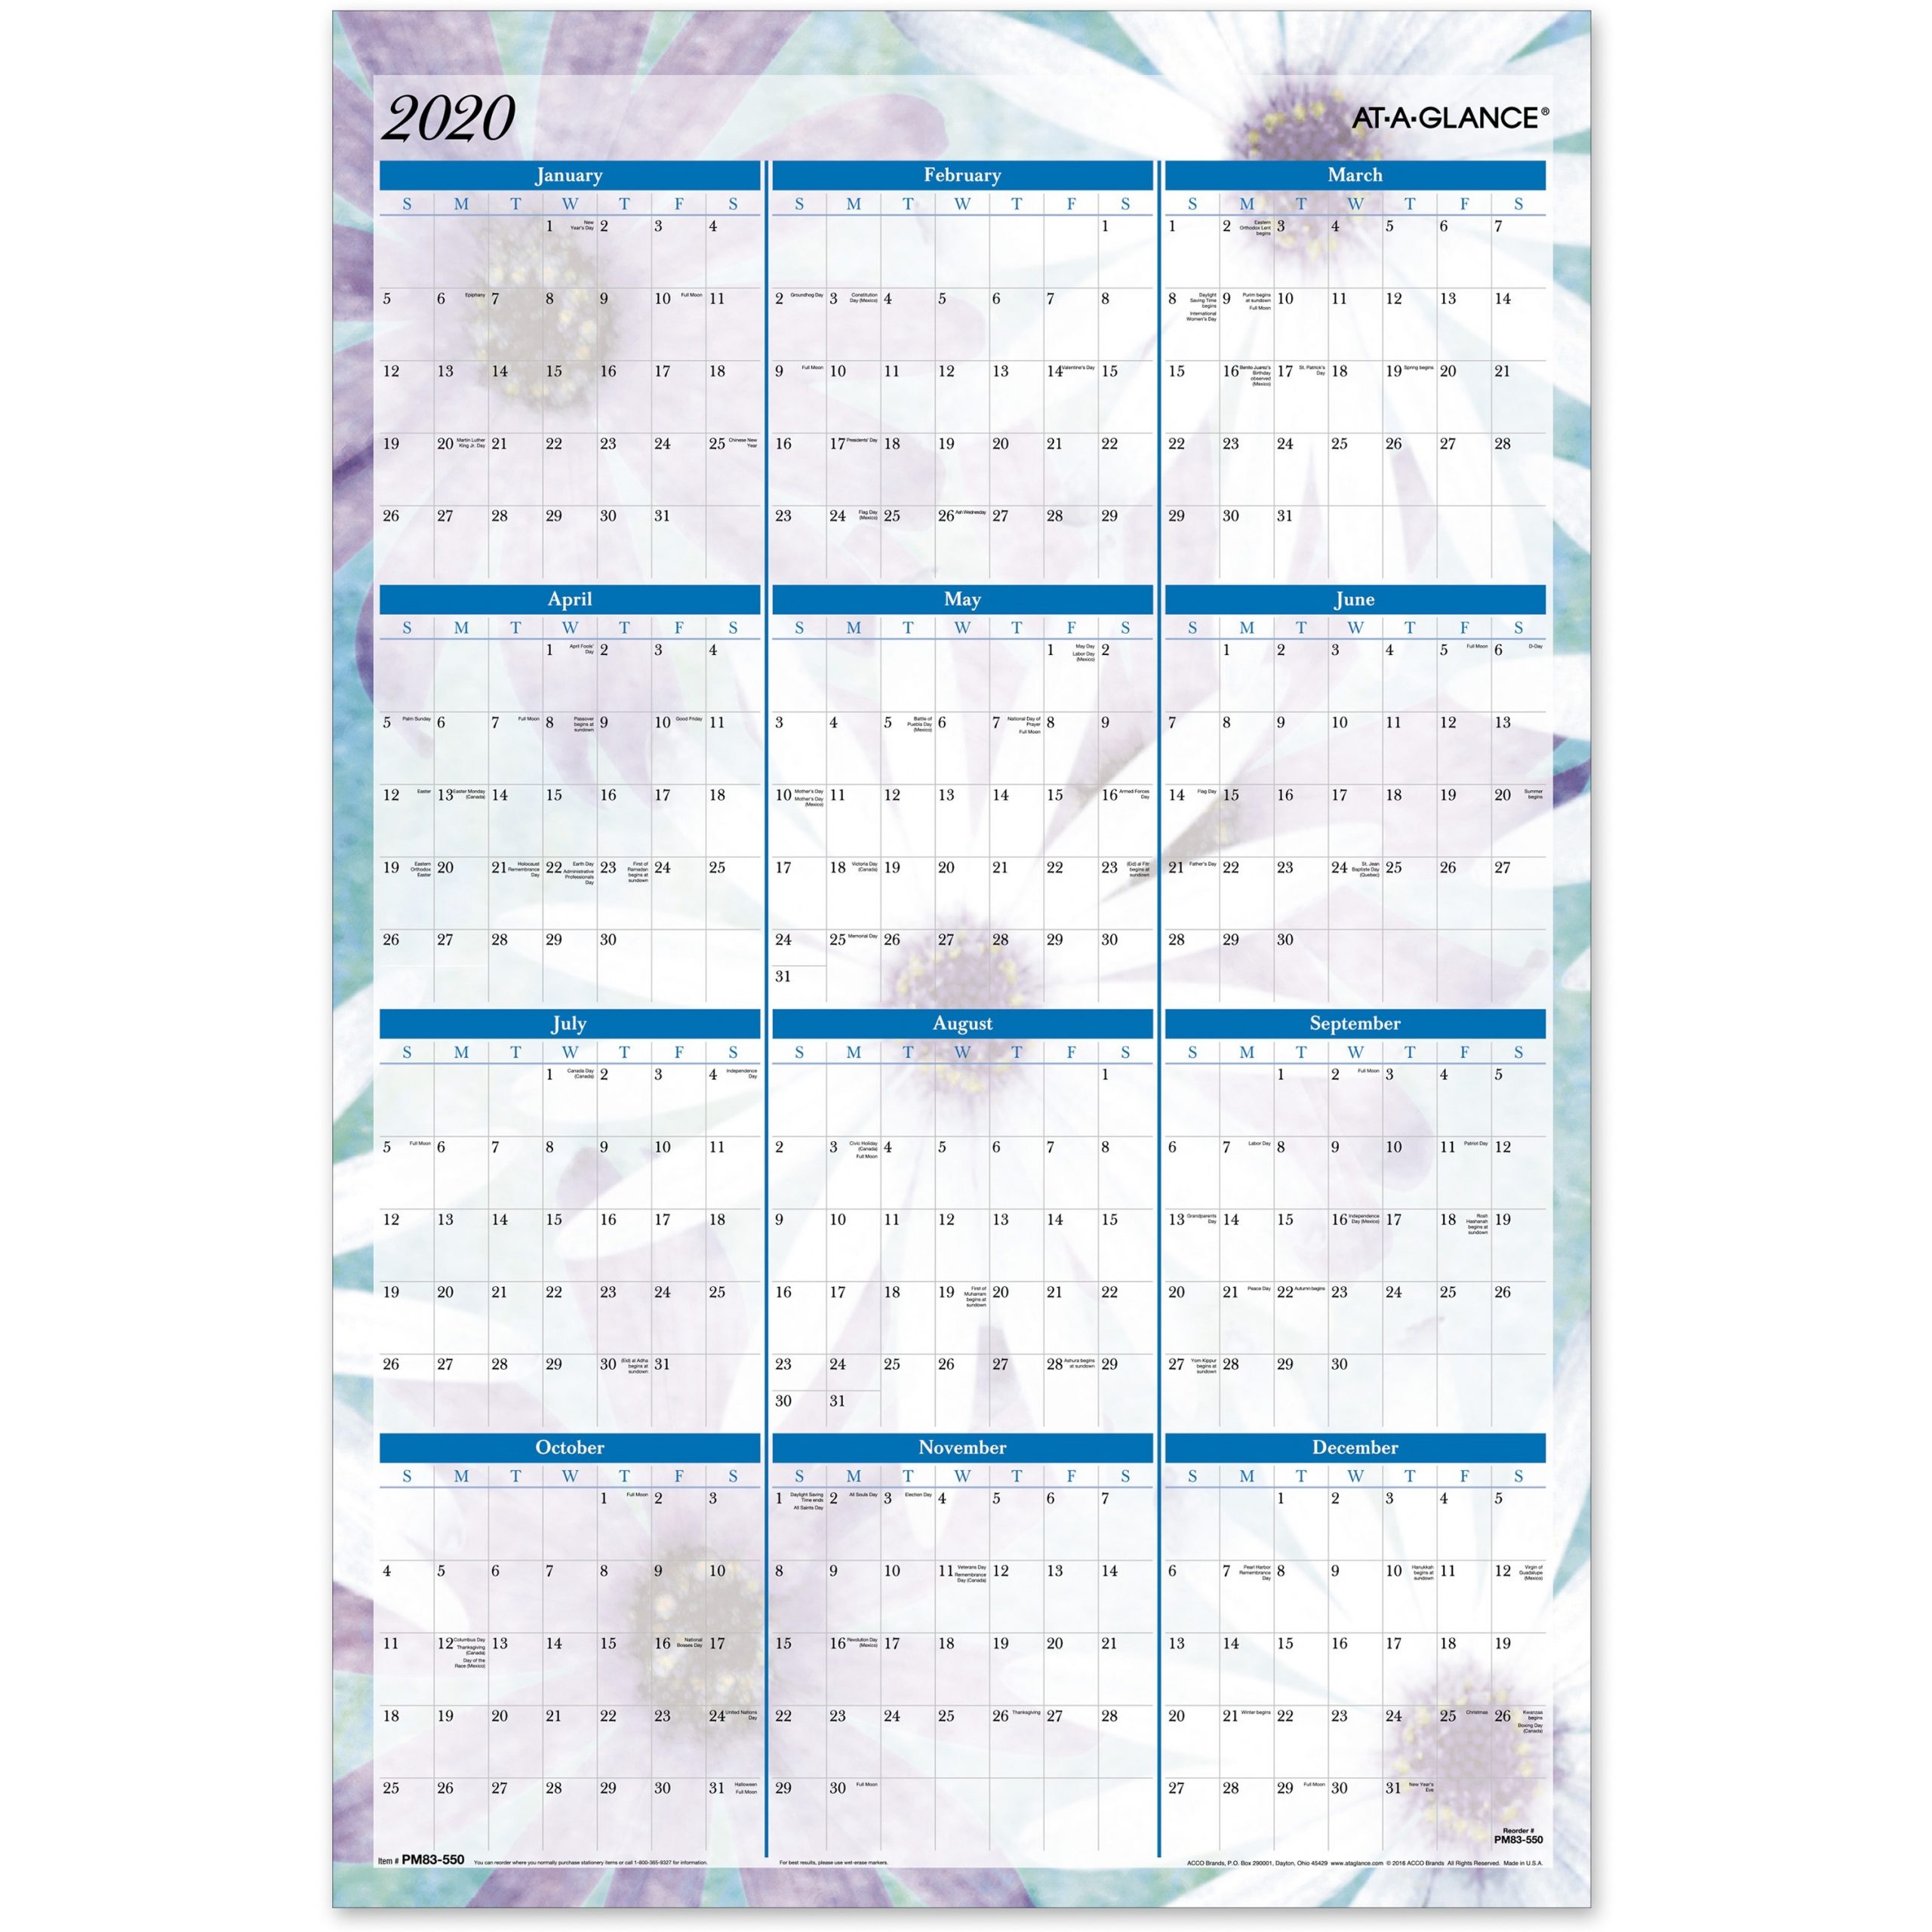 At-A-Glance Dreams Erasable Wall Planner - Yes - Monthly